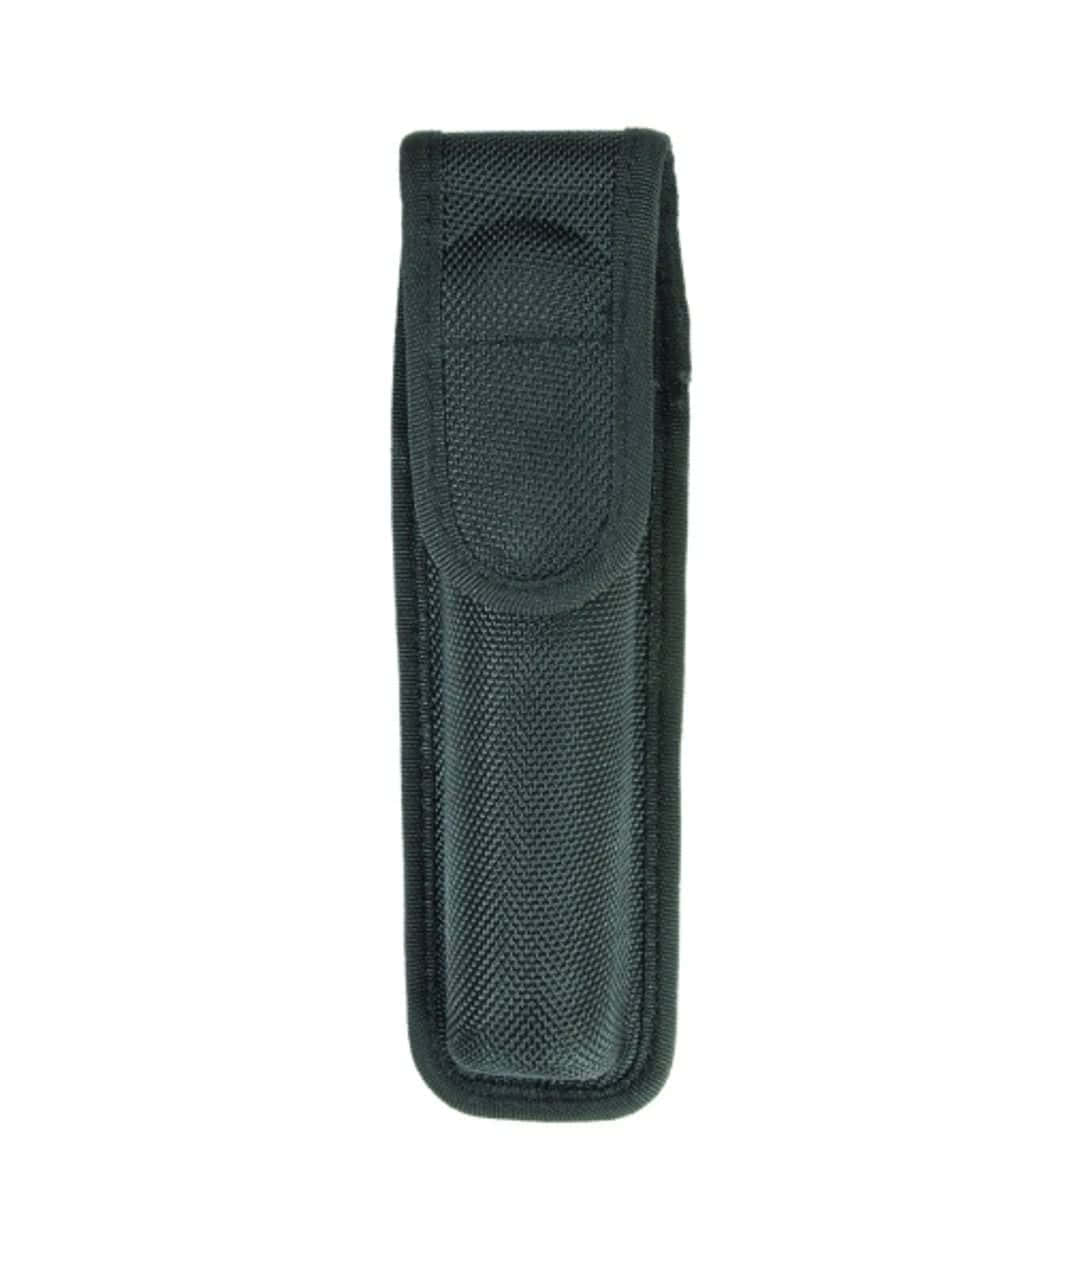 Hero's Pride Ballistic Compact Flashlight Case (Large - Closed) 1066 - Newest Products